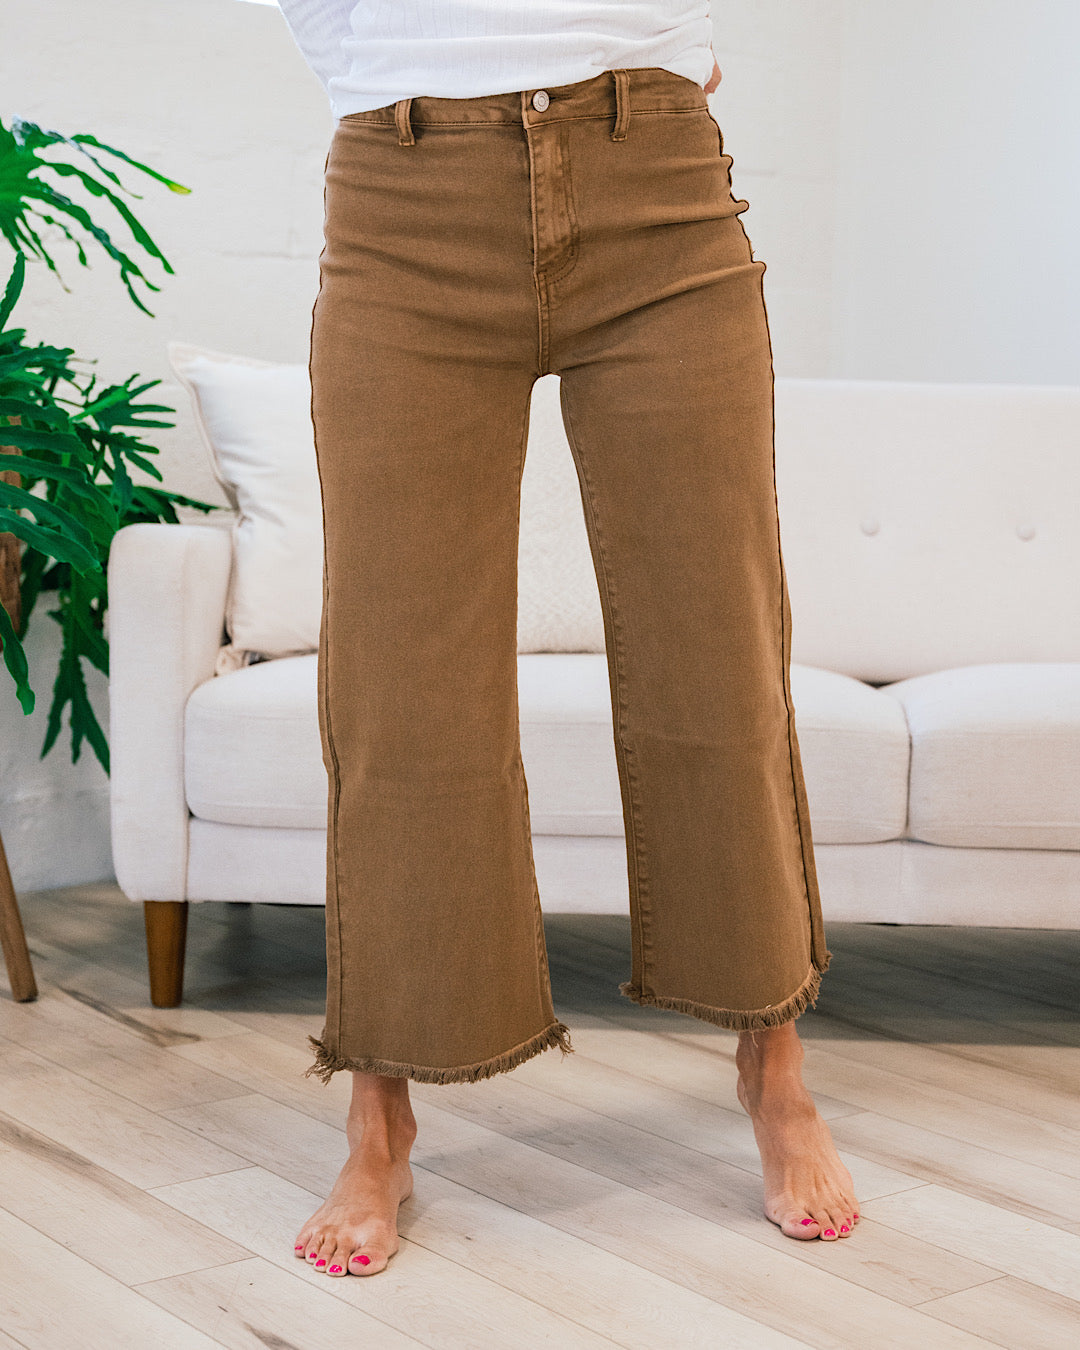 NEW! Claire Wide Leg Cropped Jeans - Deep Camel  Zenana   